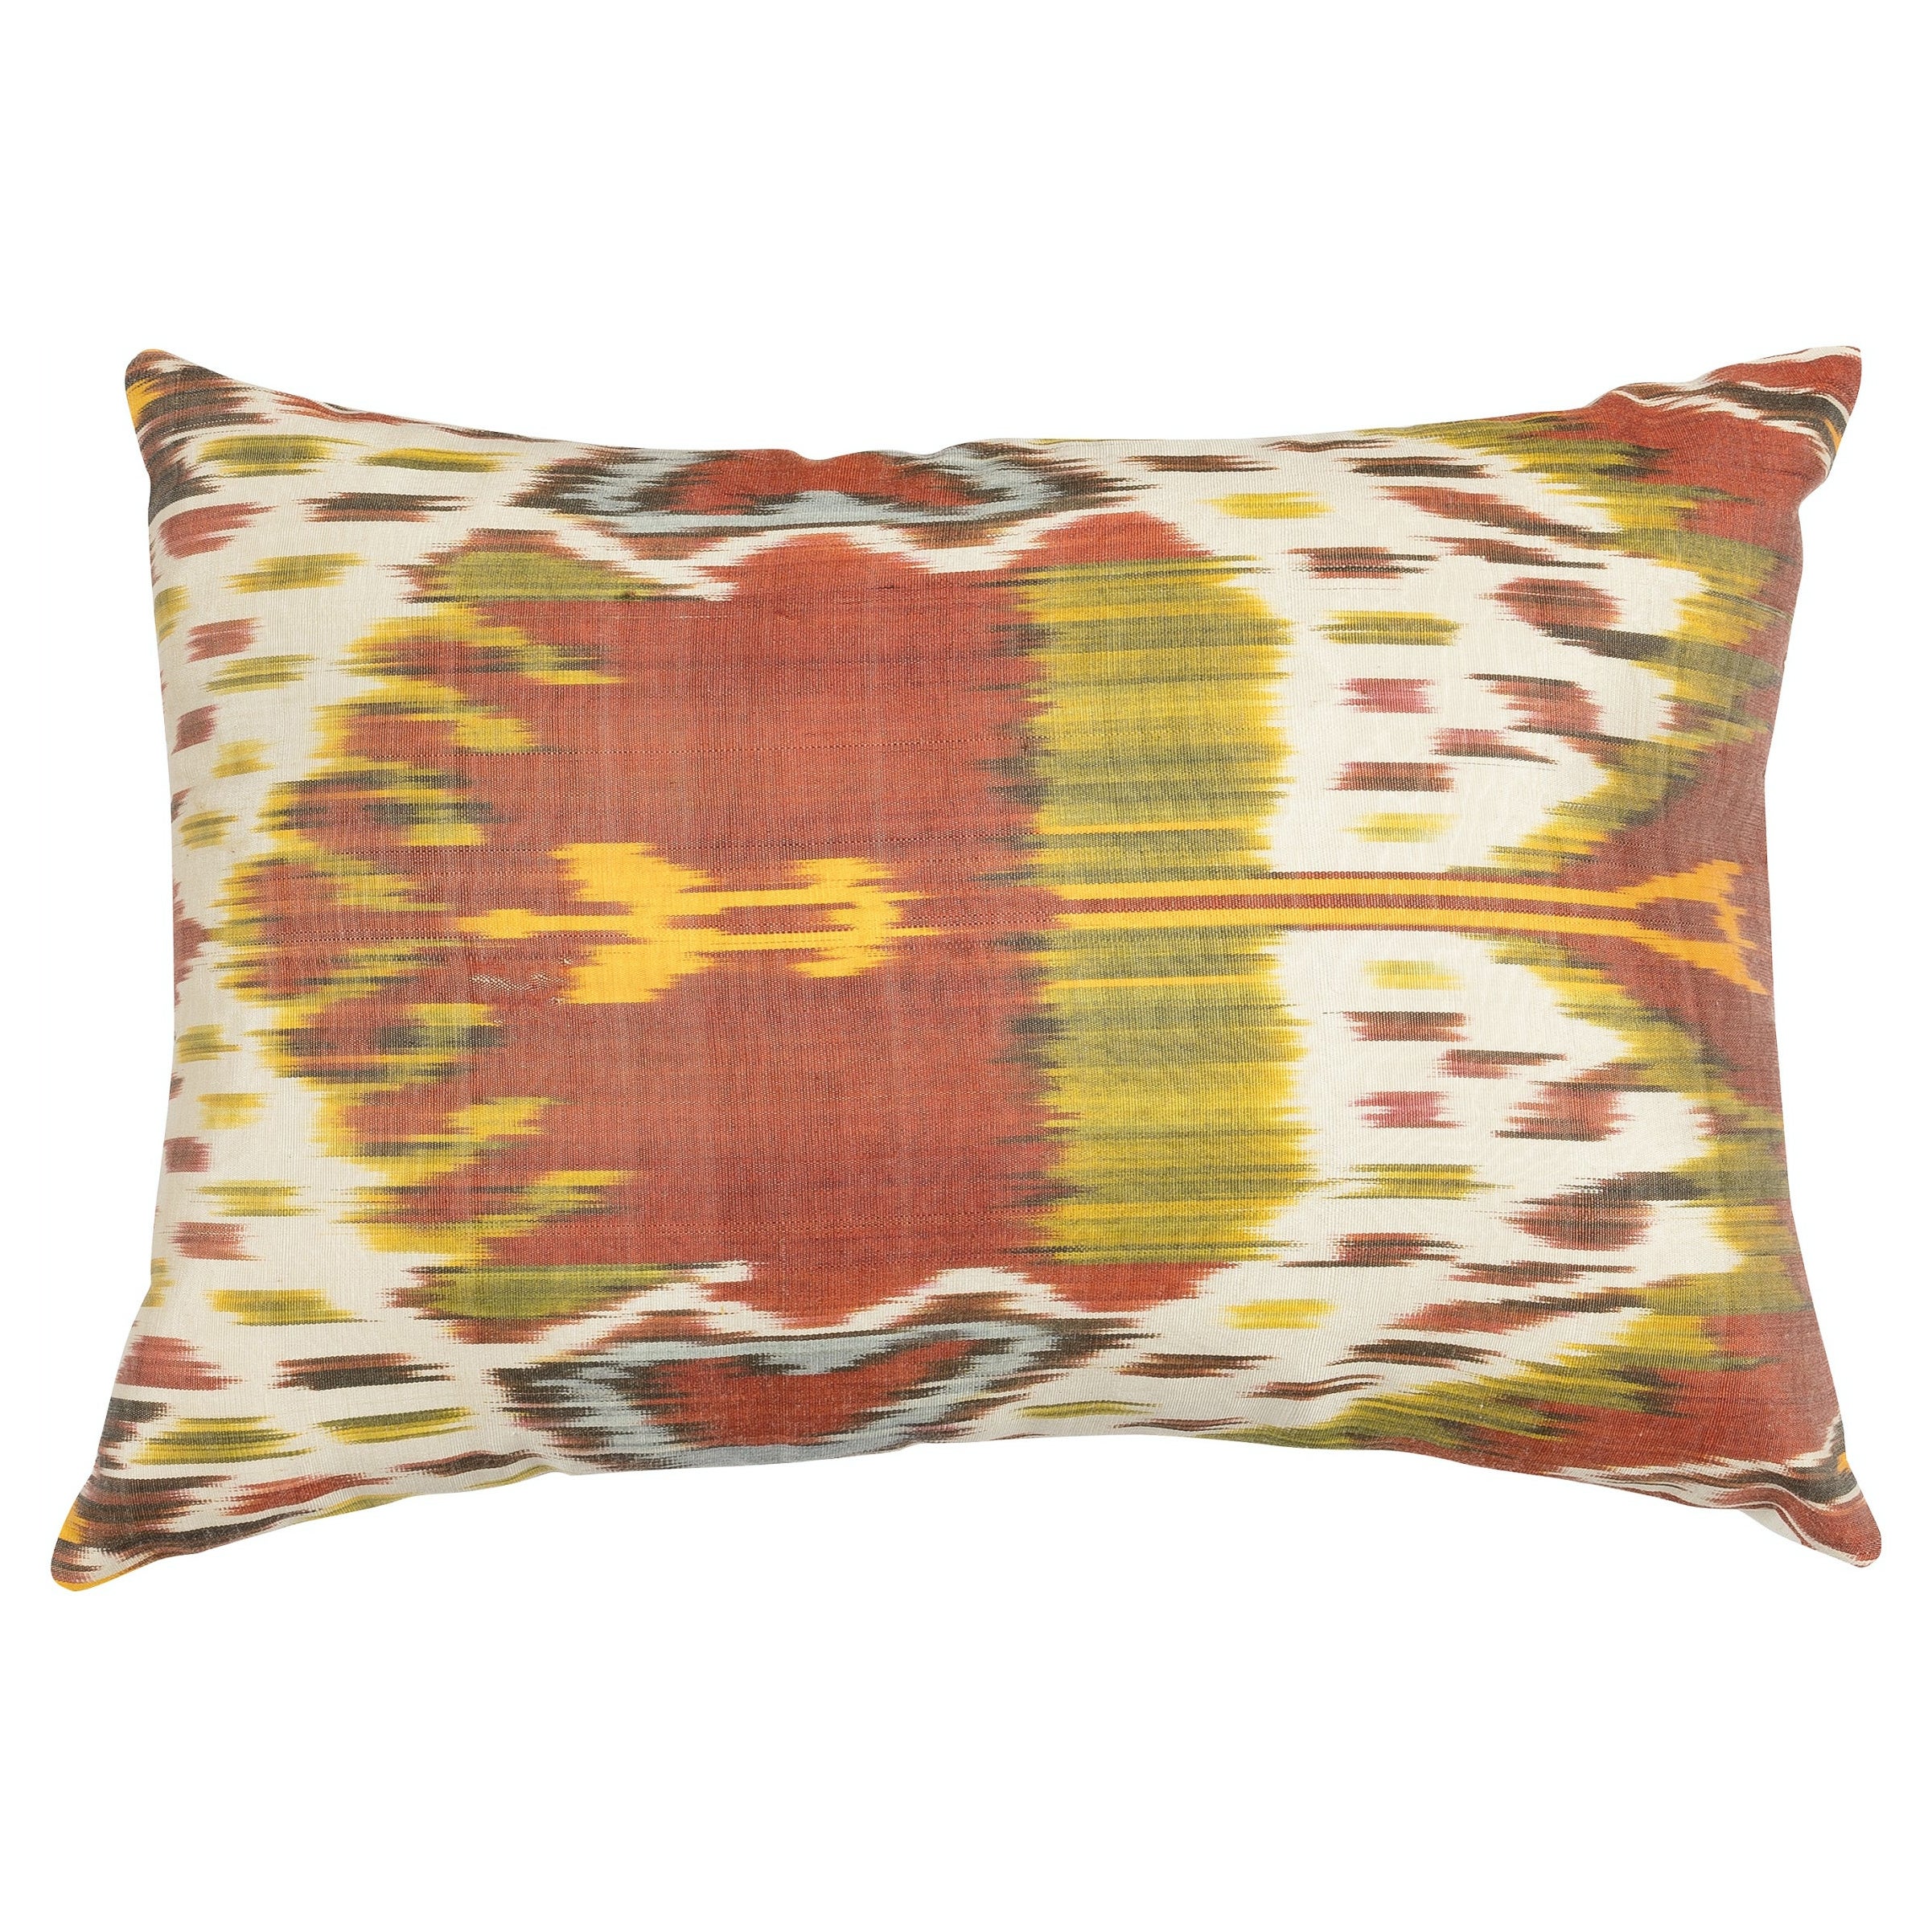 HandWoven Colorful Cushion Cover from All Cotton IKAT Fabric, Vintage Pillowcase